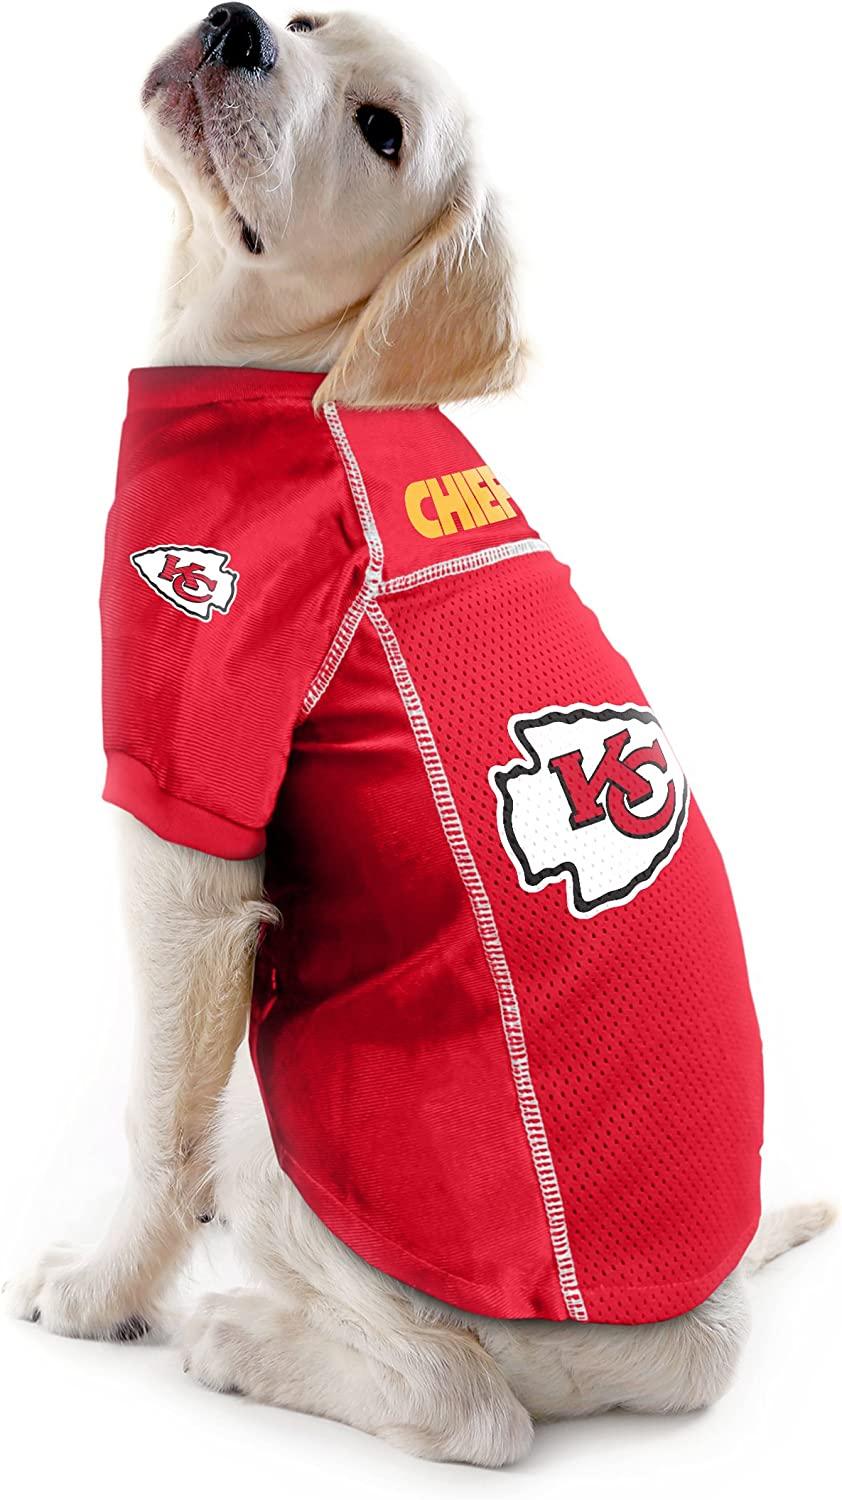  NFL Kansas City Chiefs Dog Jersey, Size: Large. Best Football  Jersey Costume for Dogs & Cats. Licensed Jersey Shirt. : Sports & Outdoors